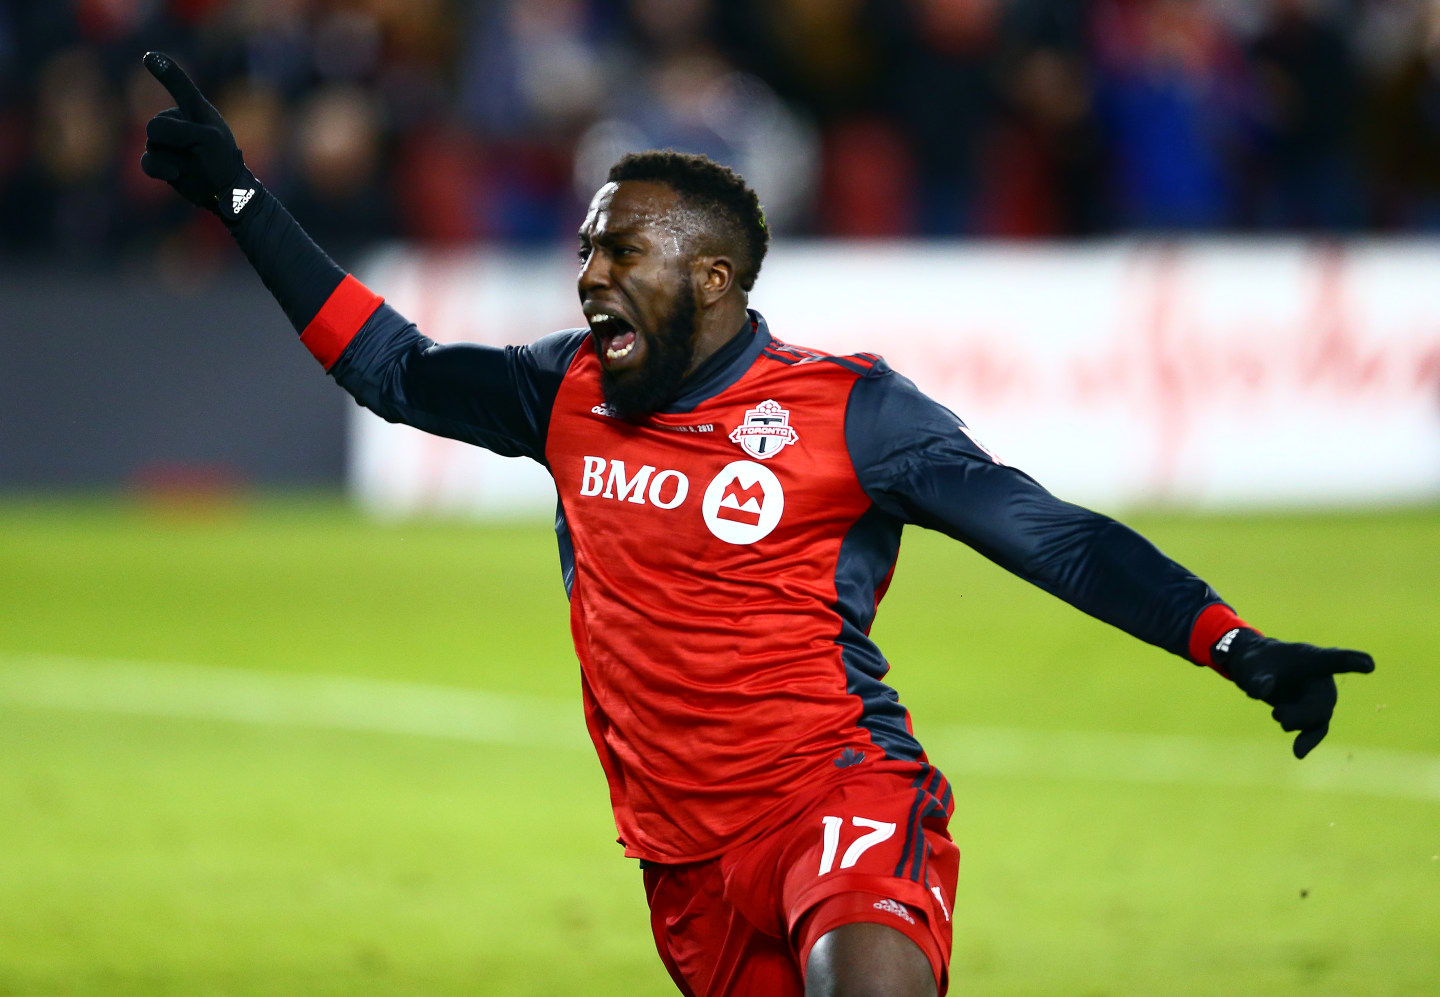 Jozy Altidore just won a trophy for Toronto, but he’s everyone’s champion